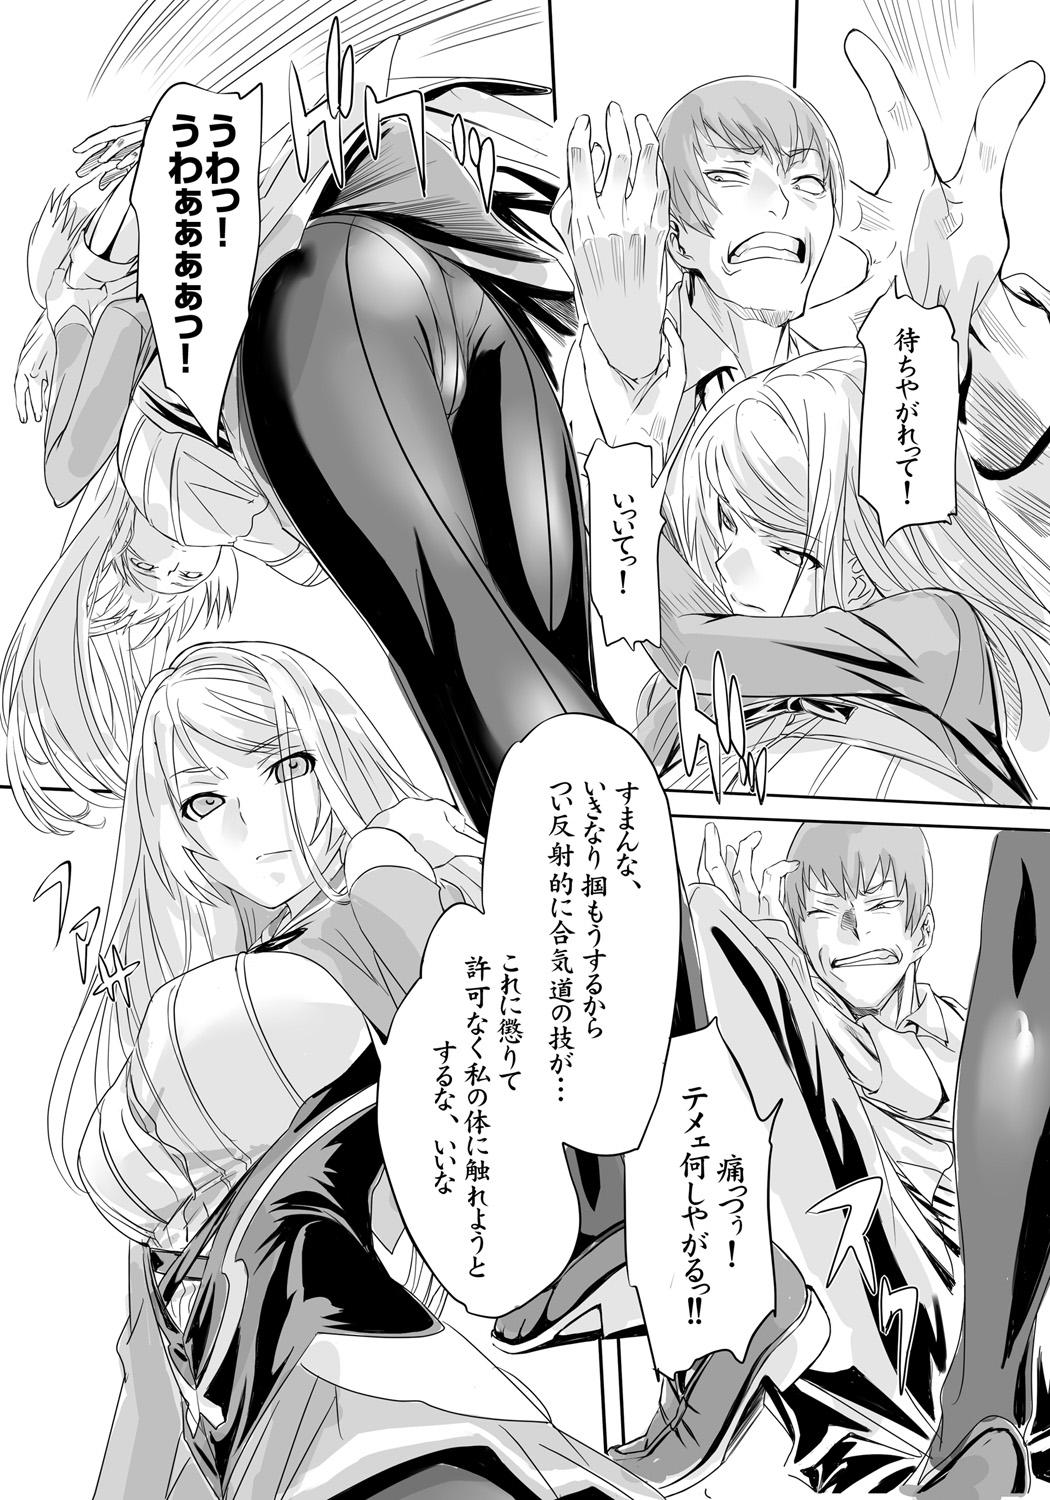 All Kuppuku Reijou GOLD Action - Page 6